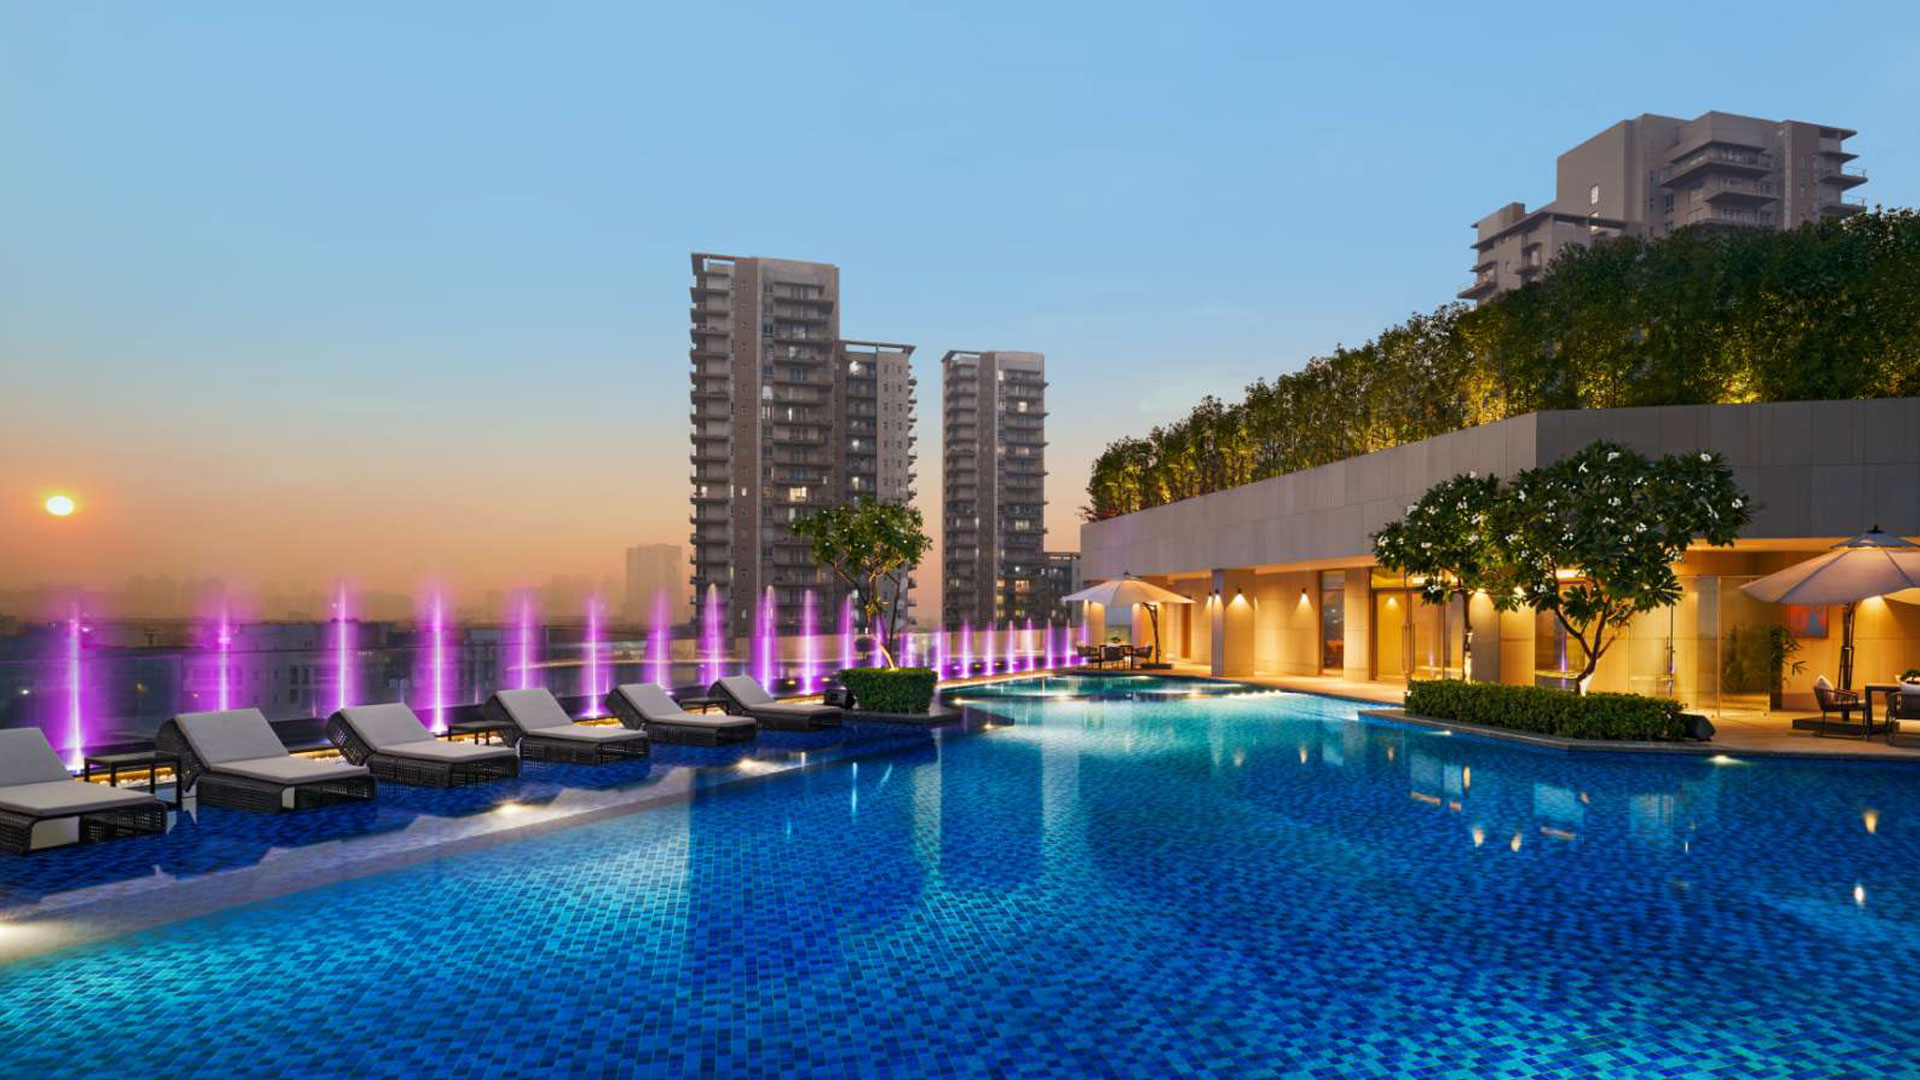 The Best Features of Puri Diplomatic Greens Sector 111 Gurgaon